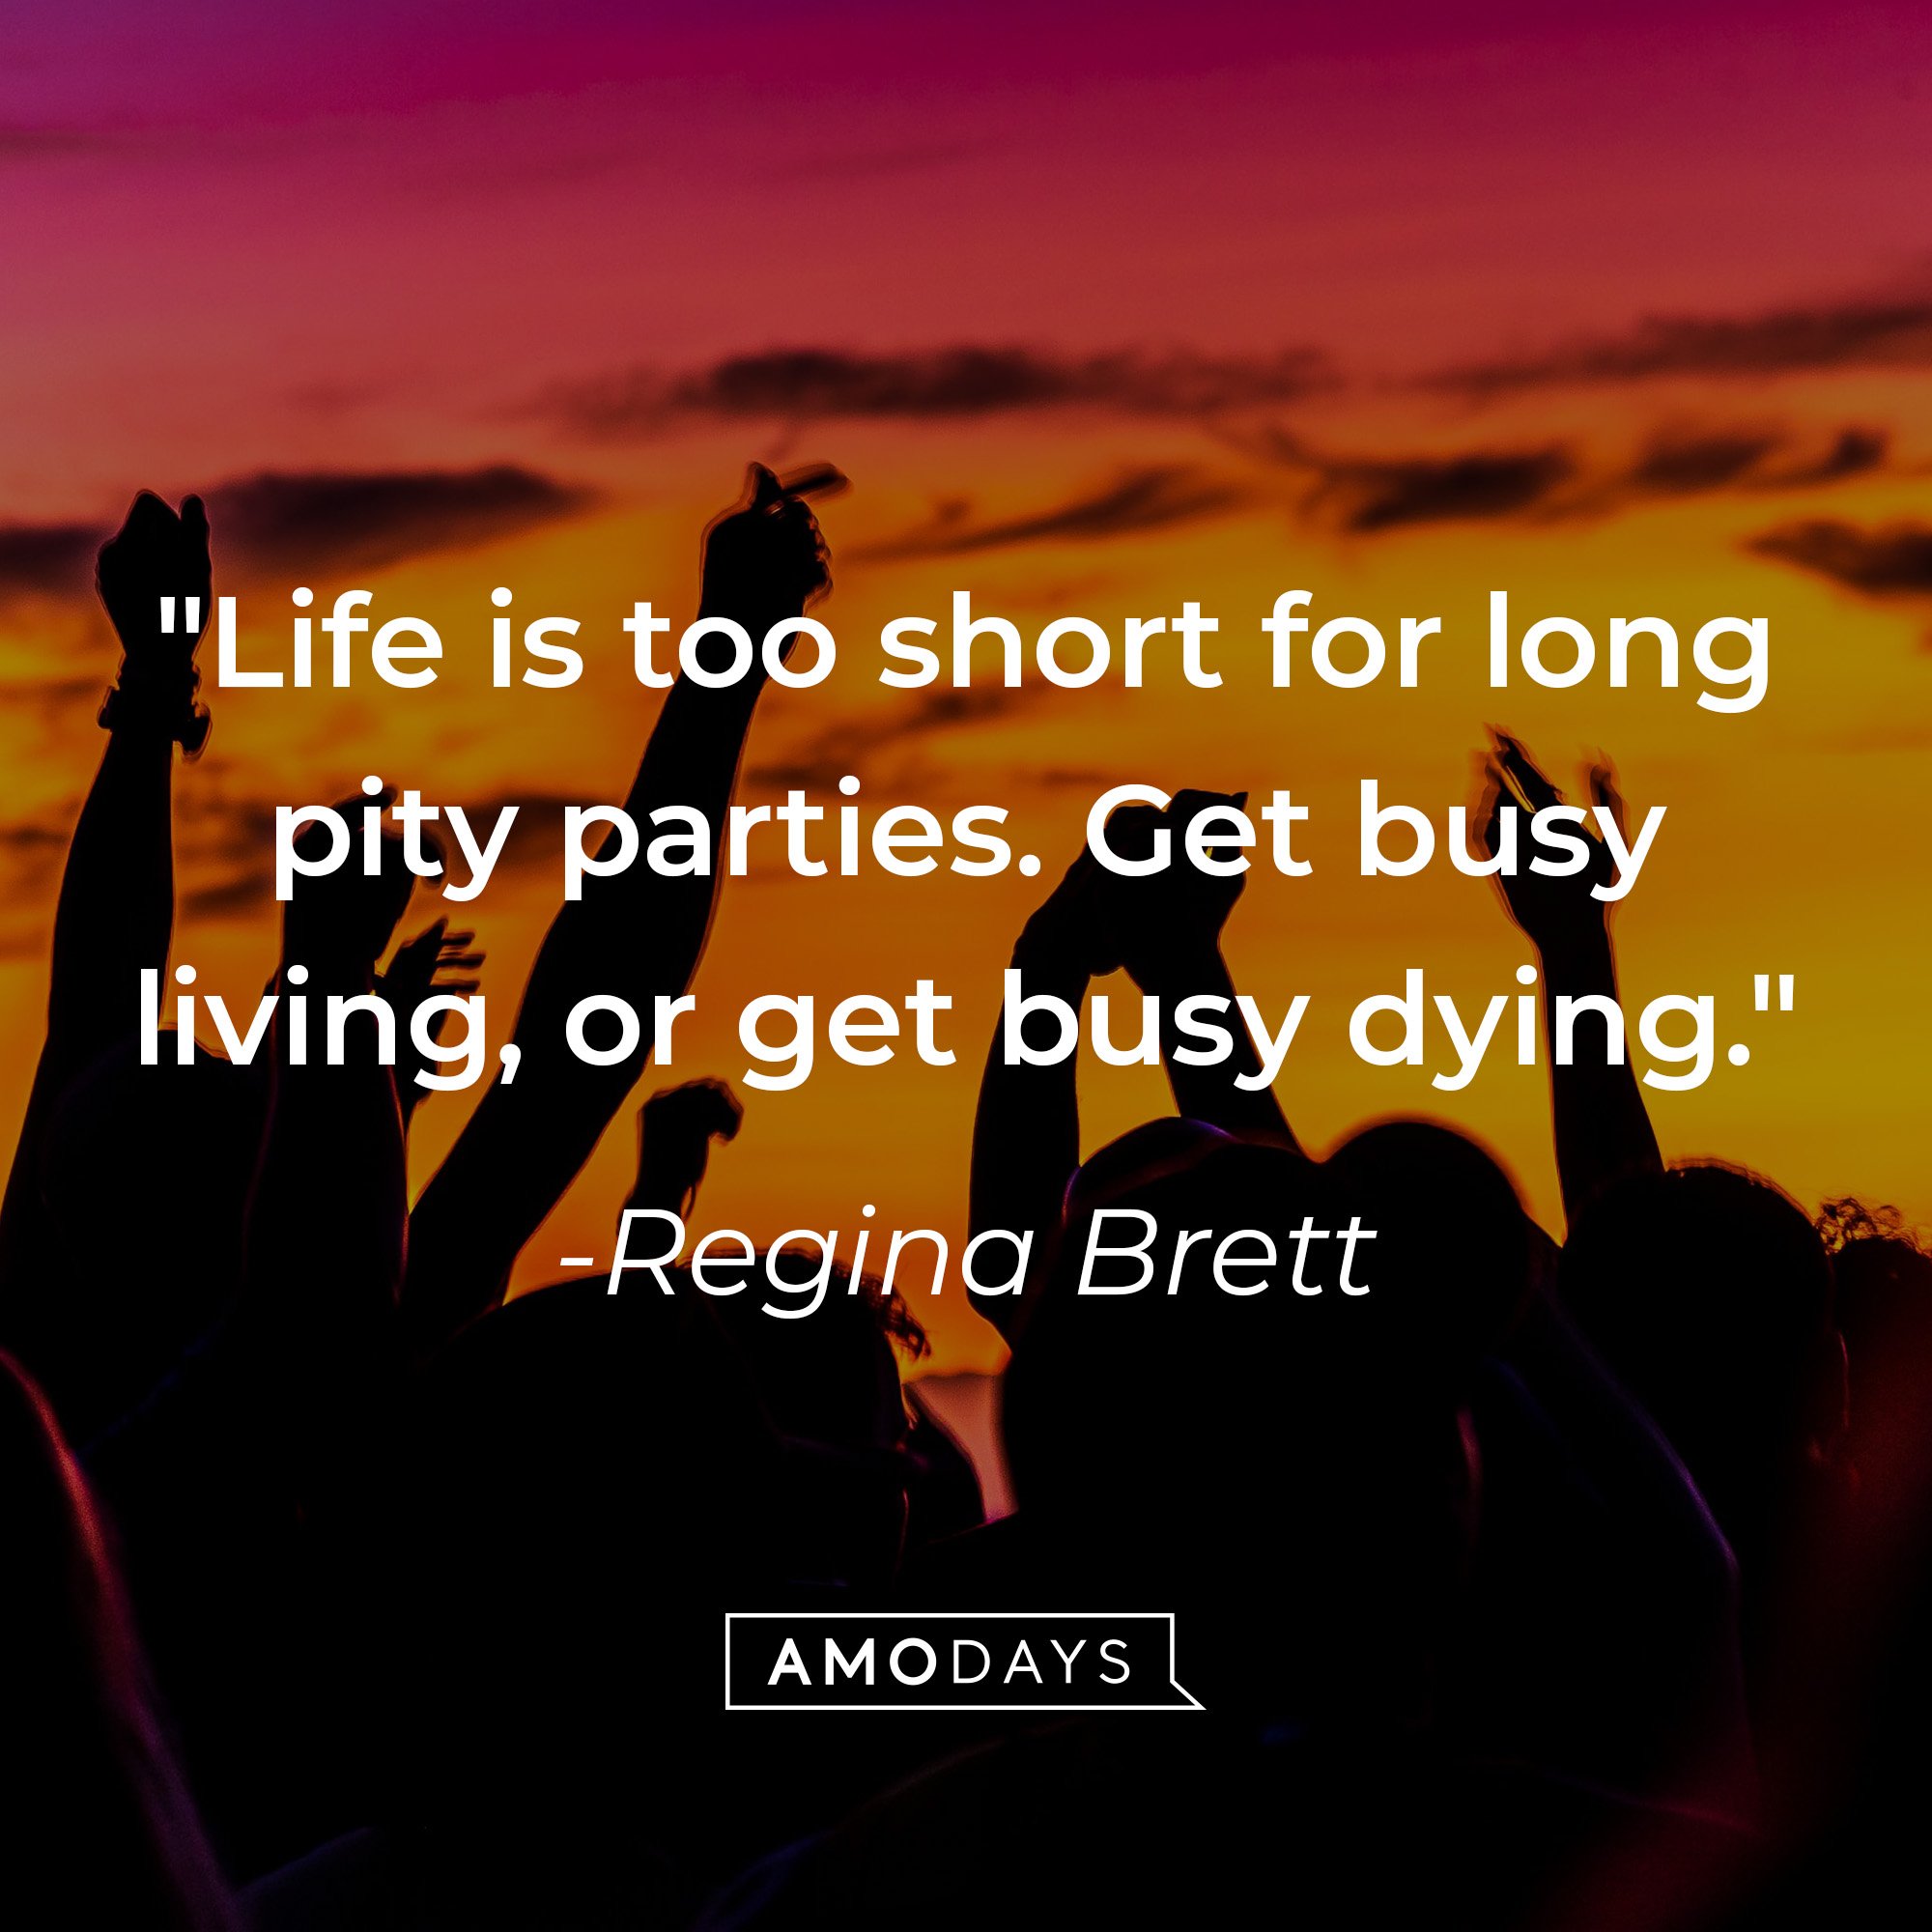 Regina Brett's quote: "Life is too short for long pity parties. Get busy living or get busy dying." | Image: AmoDays 